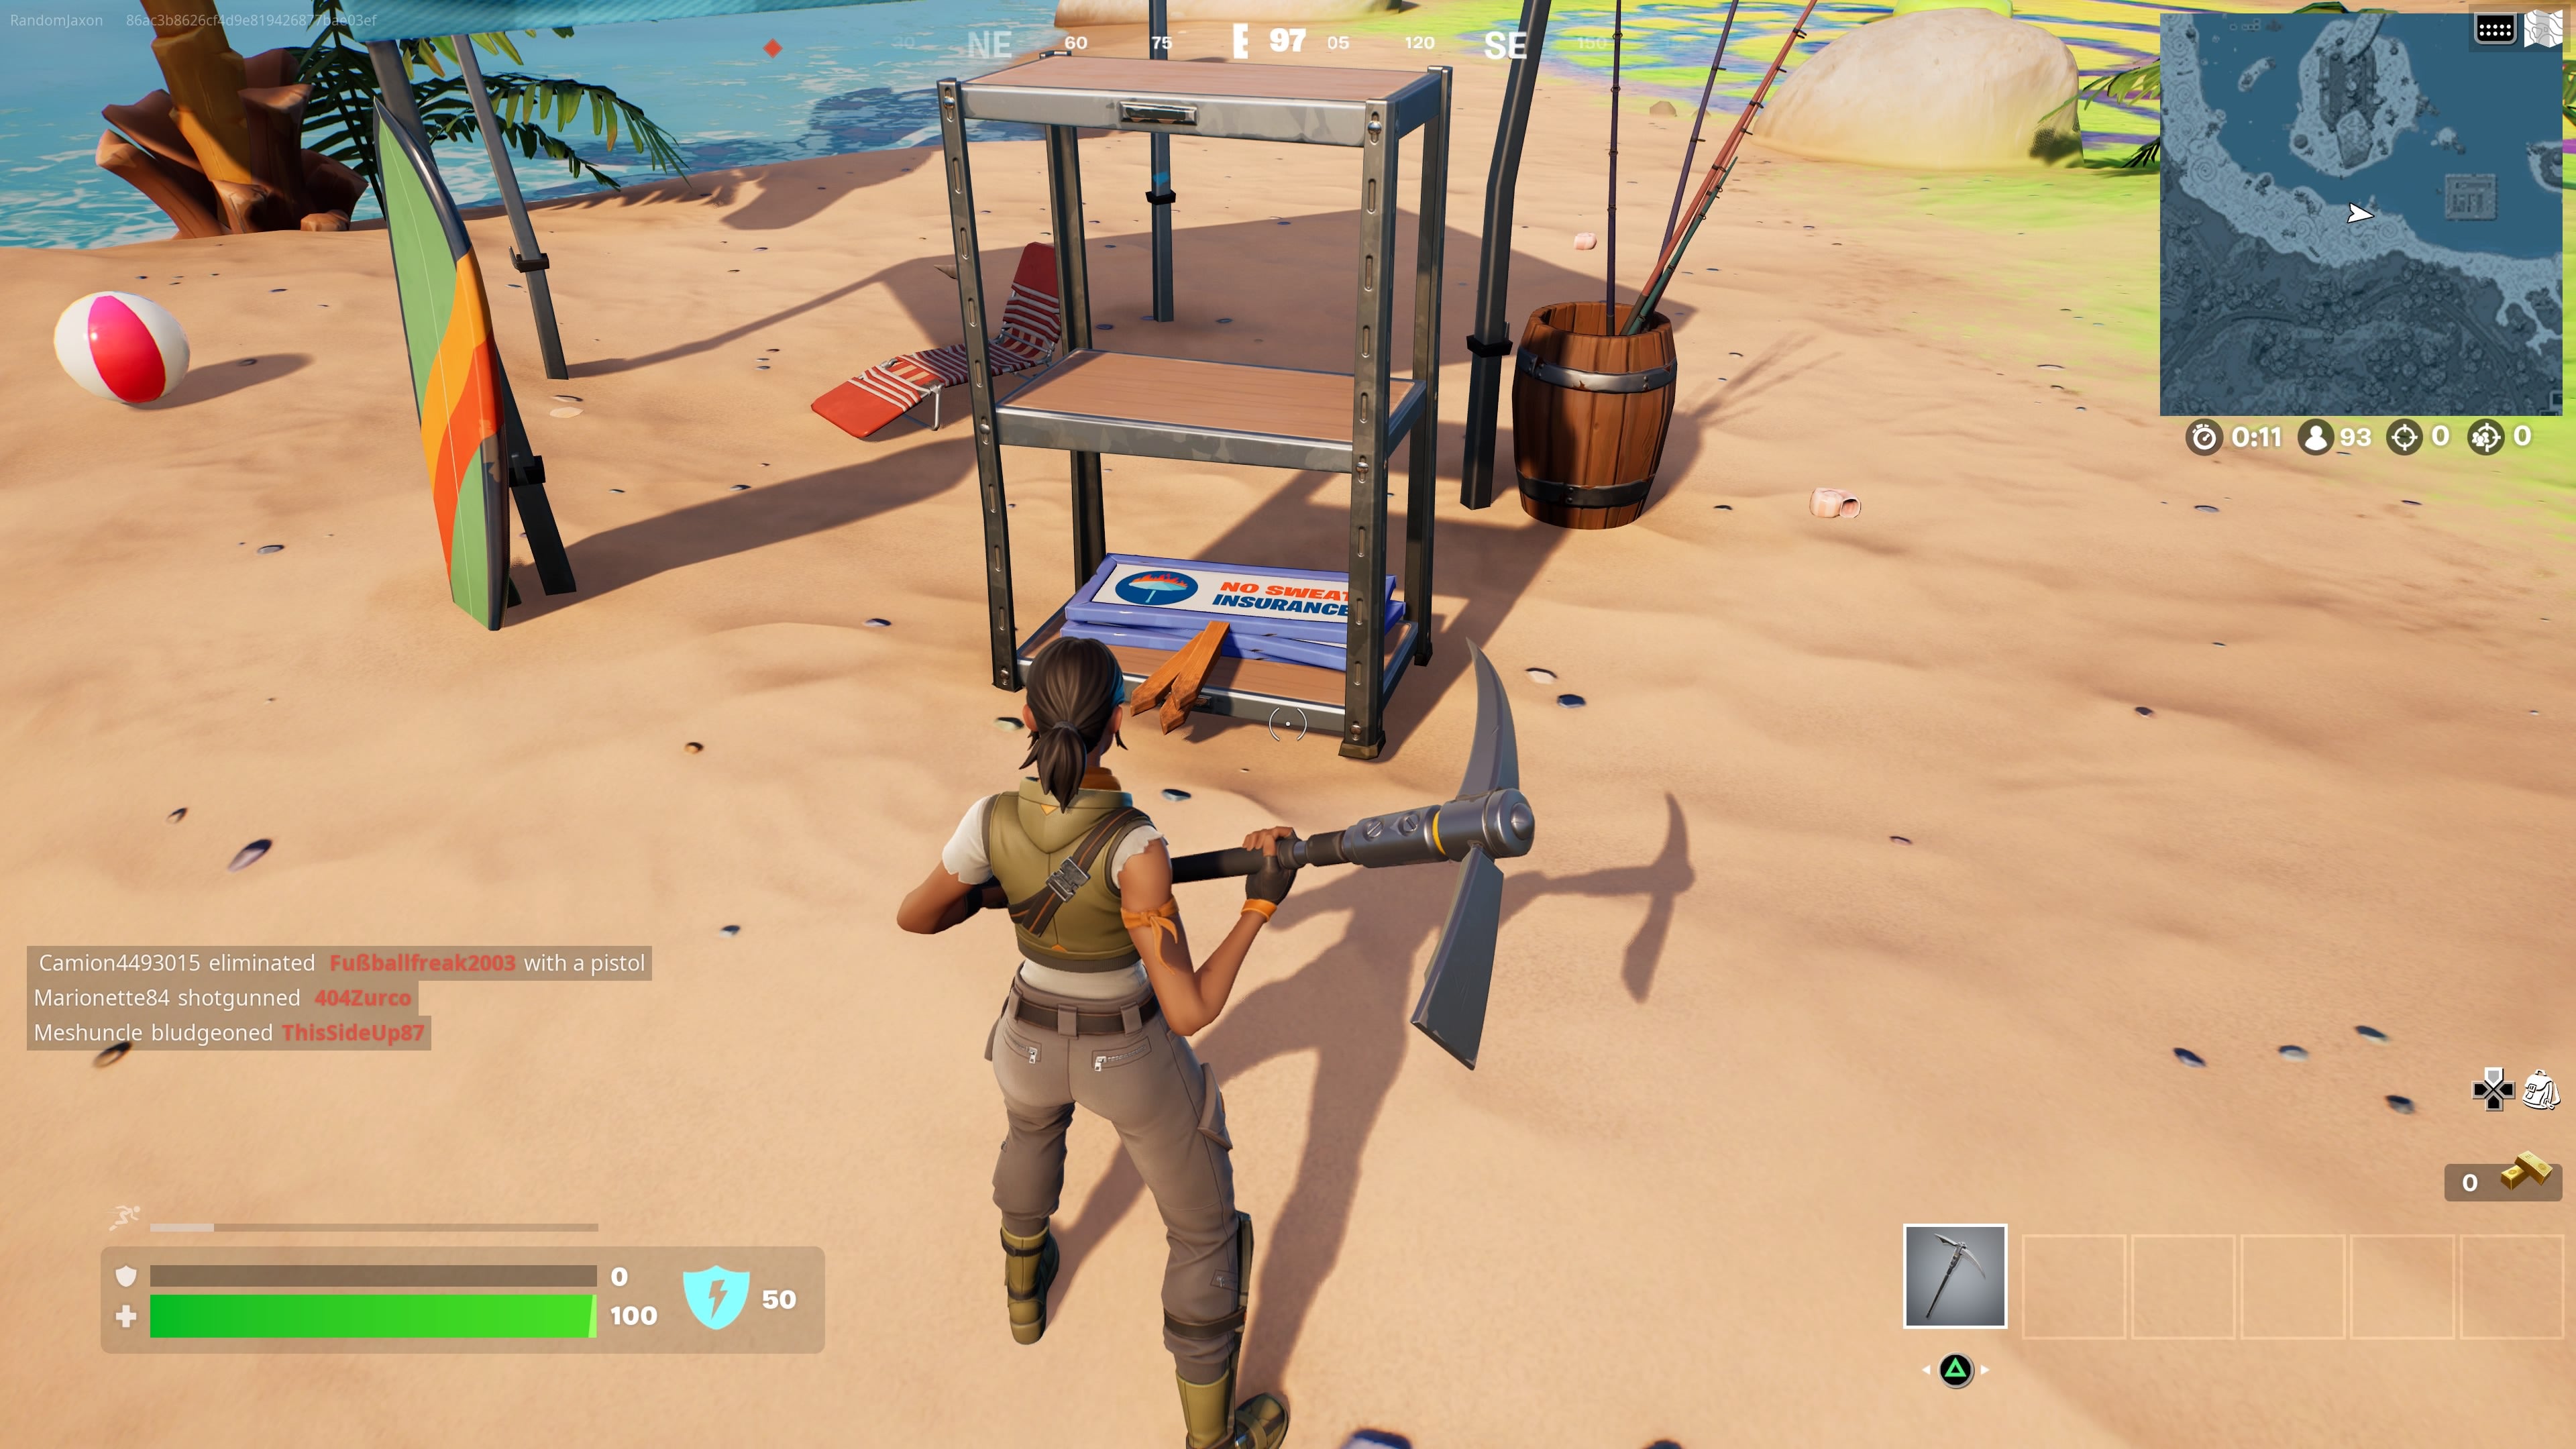 Sign stand in Fortnite's Summer Nights event